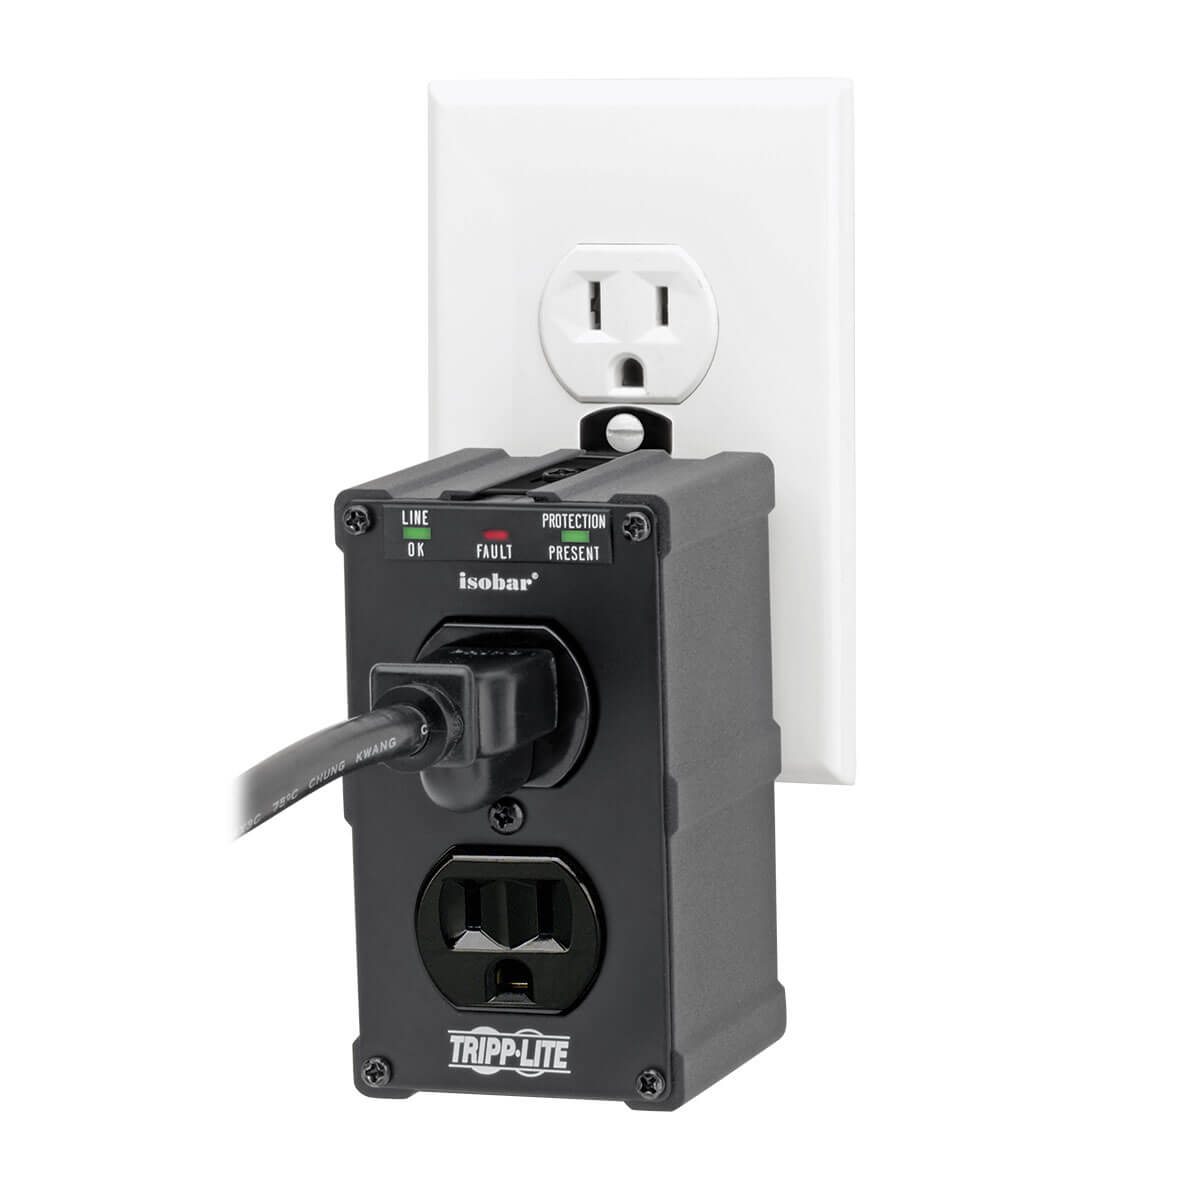 Isobar Surge Protector, 2 Outlet, 1410 Joules, Diagnostic LED | Eaton